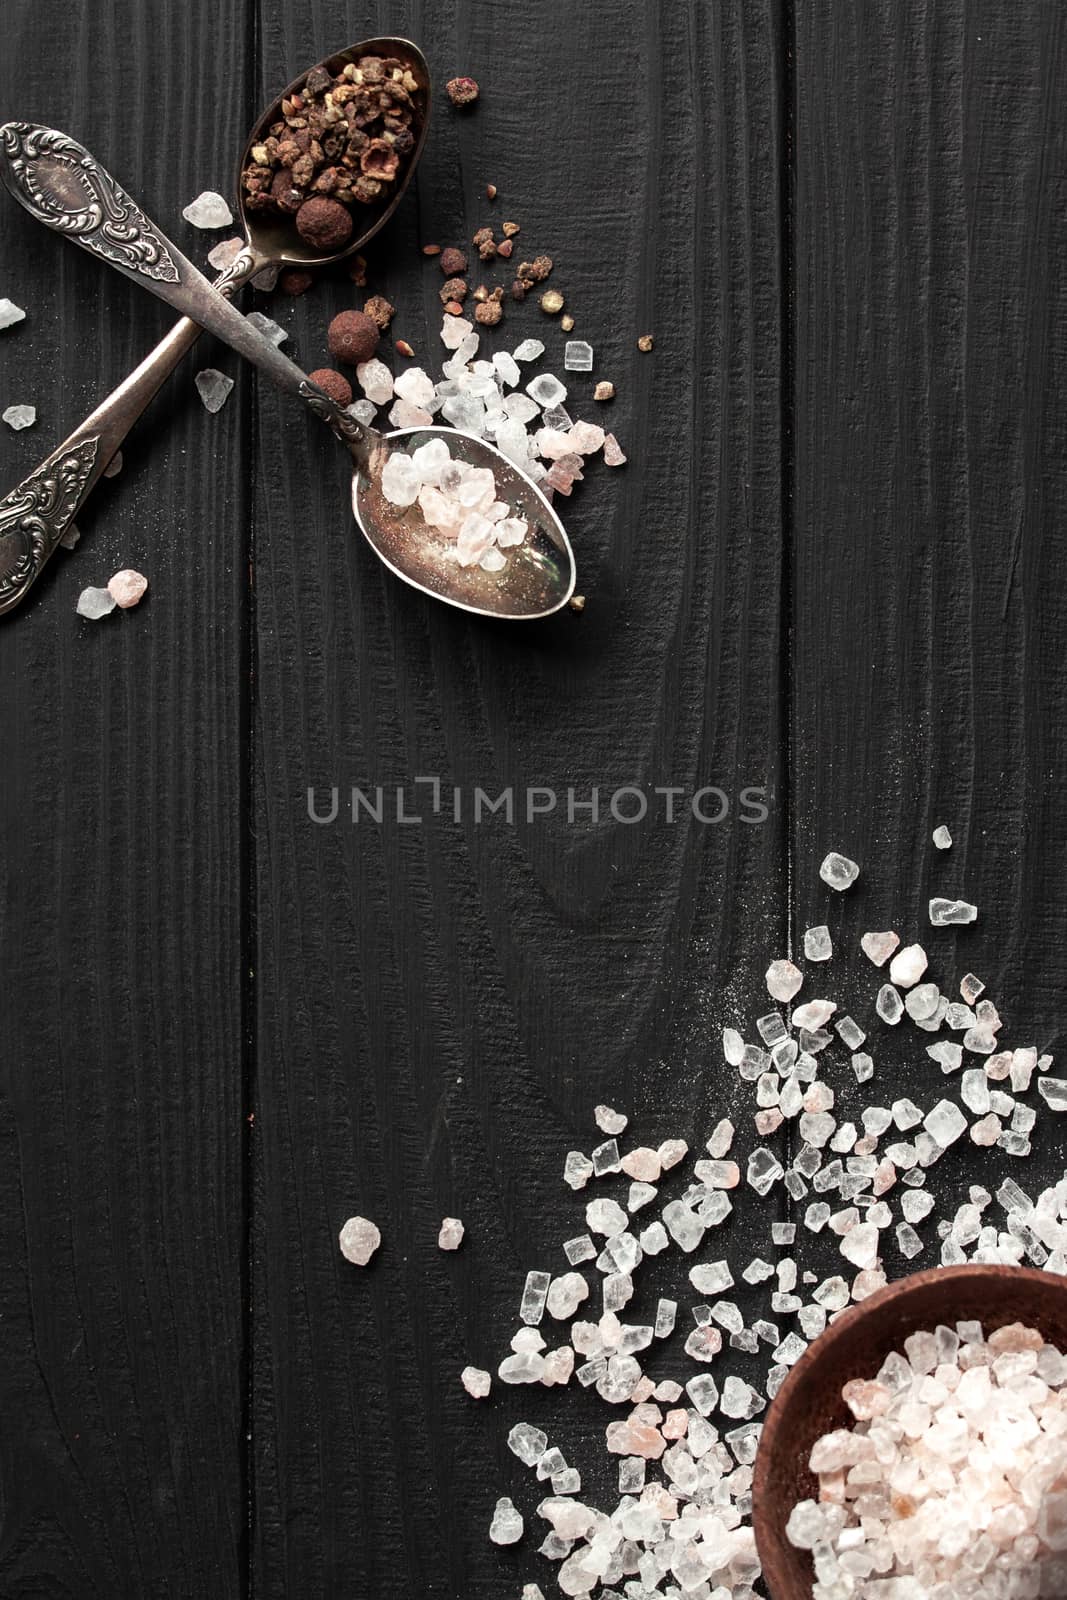 Spoons with Himalayan salt and seasonings on a black wooden background and a saucer with salt. With place for inscription